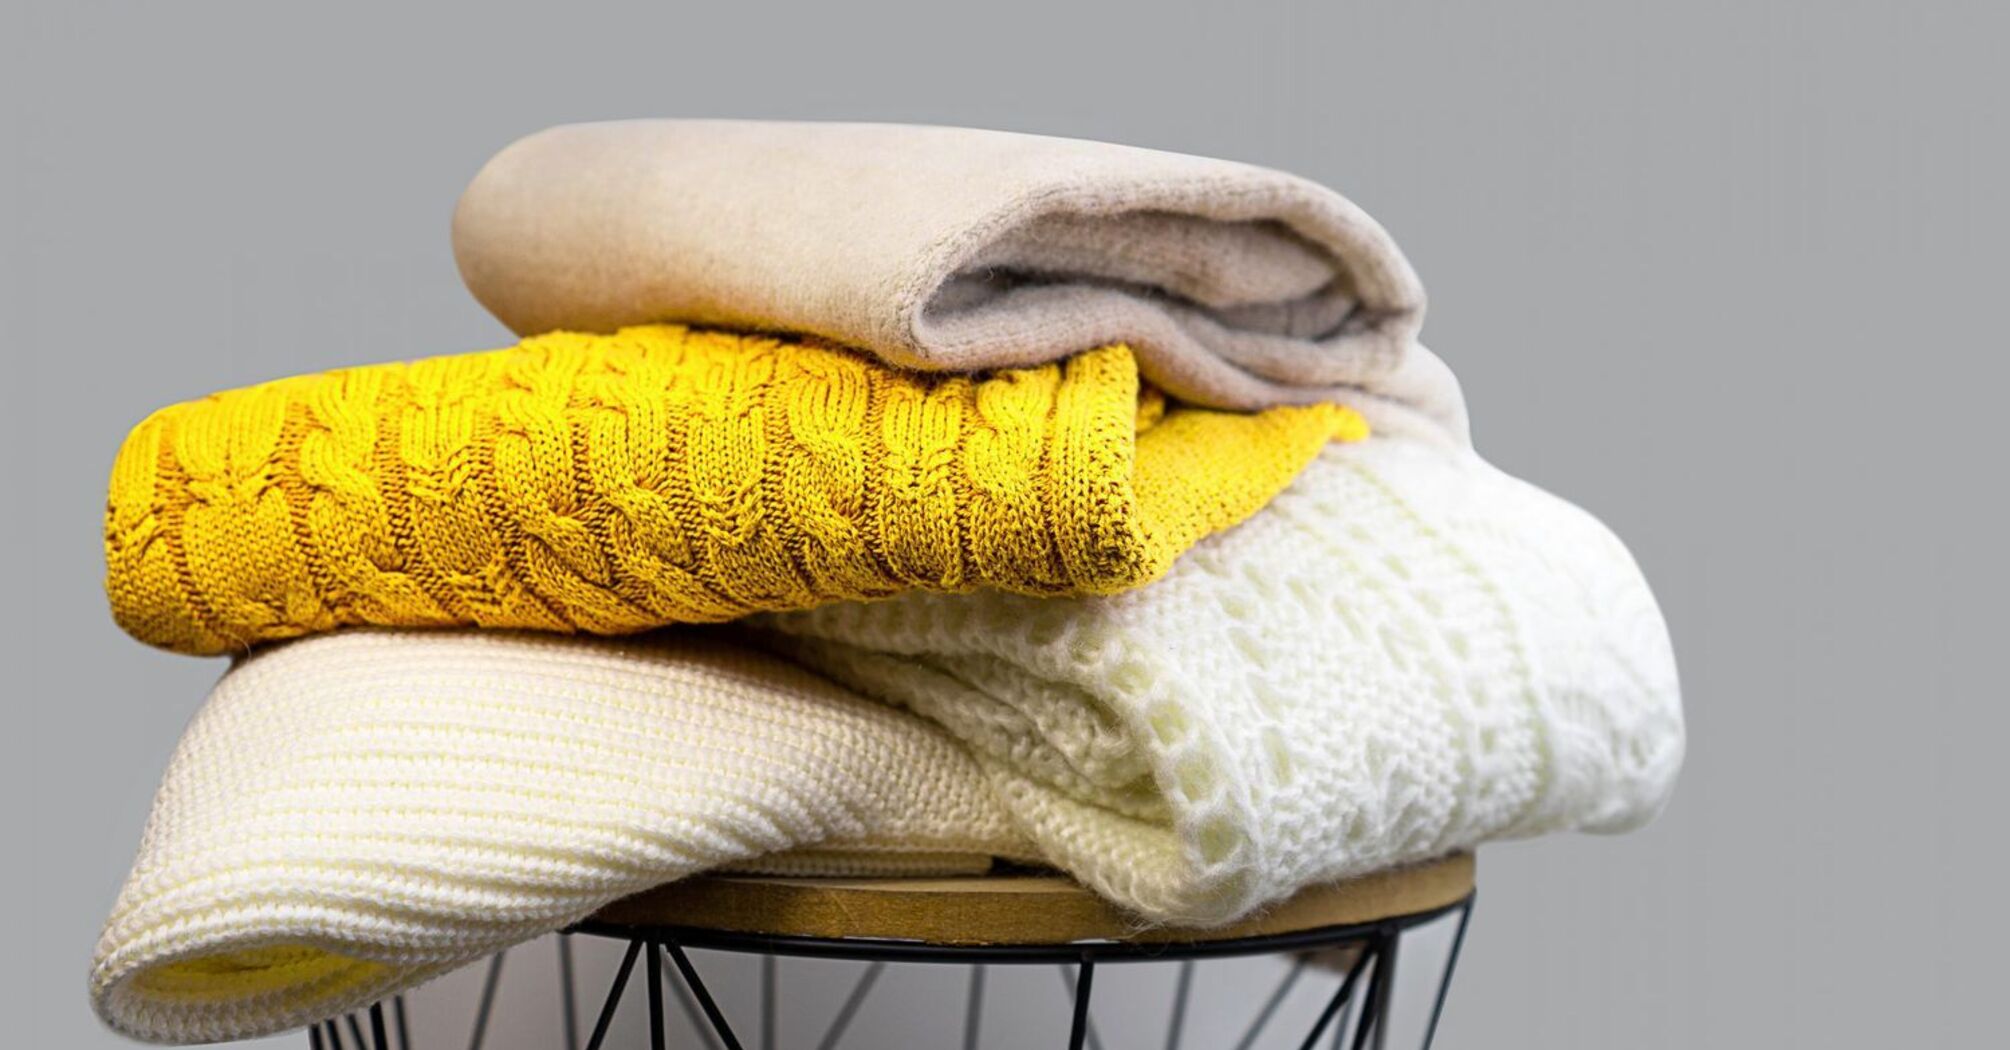 How to care for wool sweaters properly